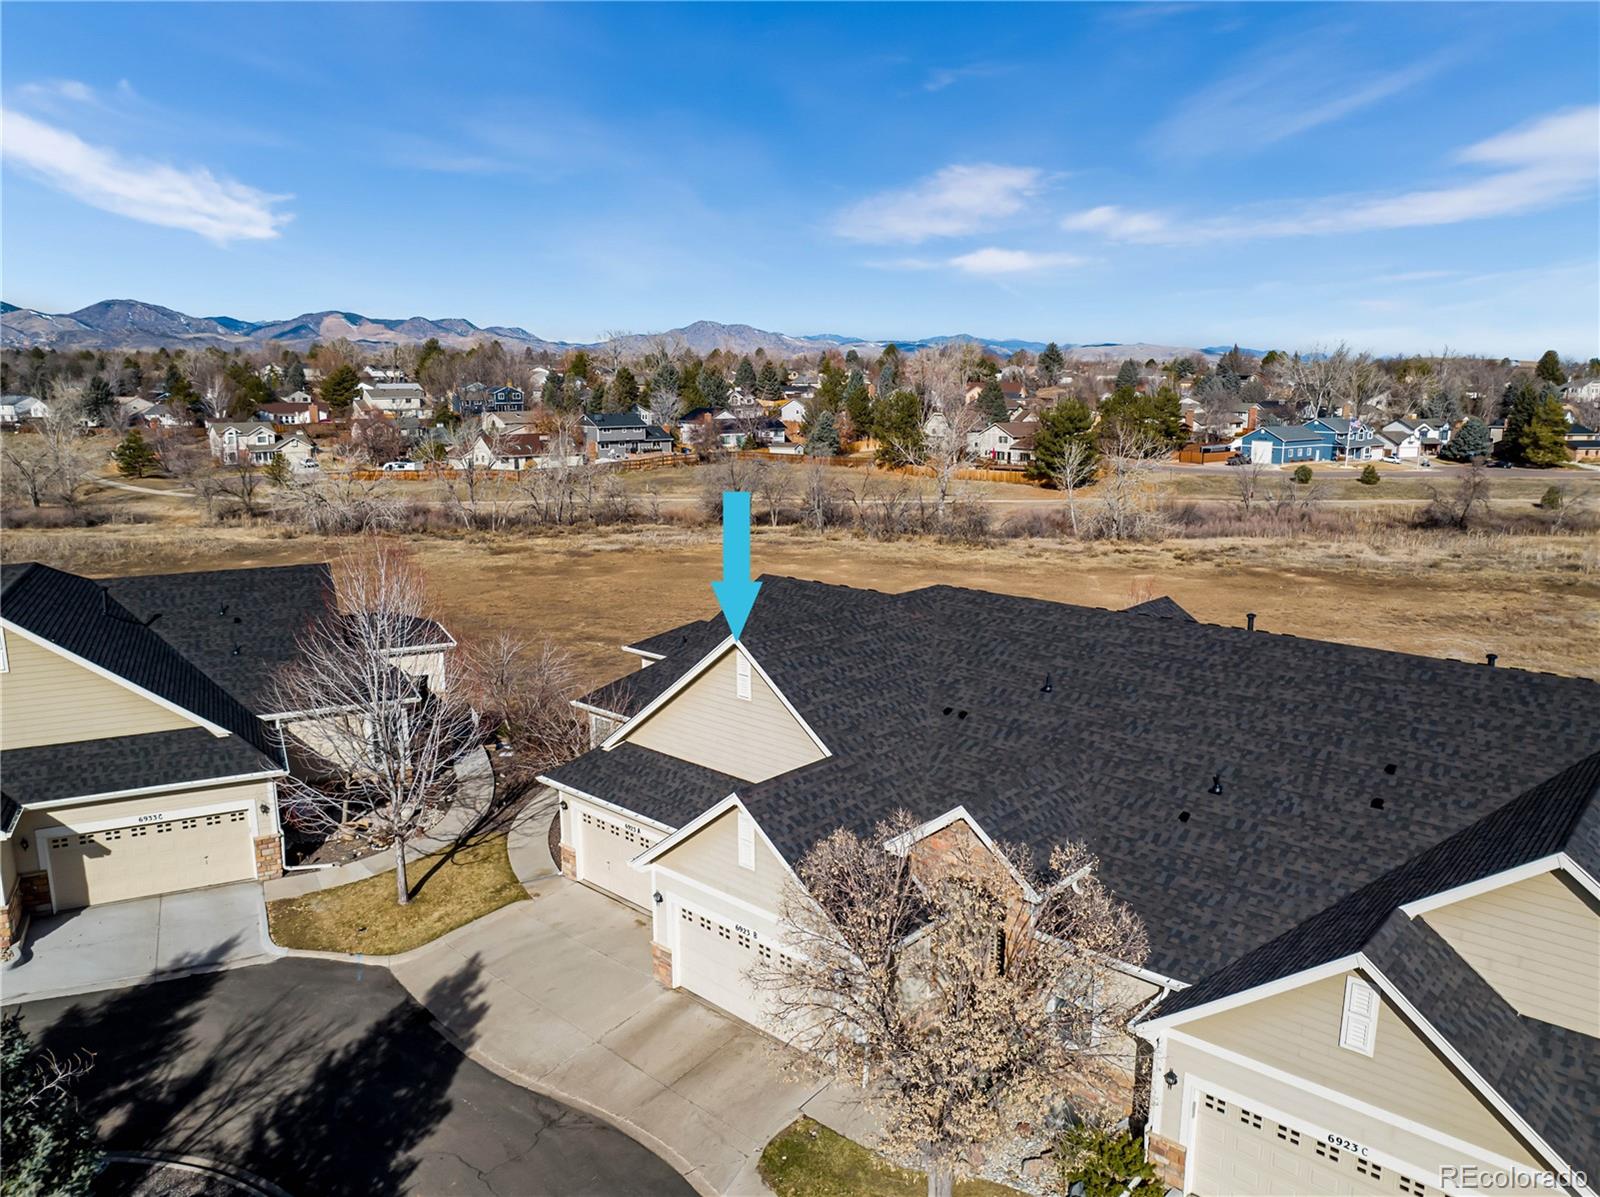 Report Image for 6923 W Euclid Place,Littleton, Colorado